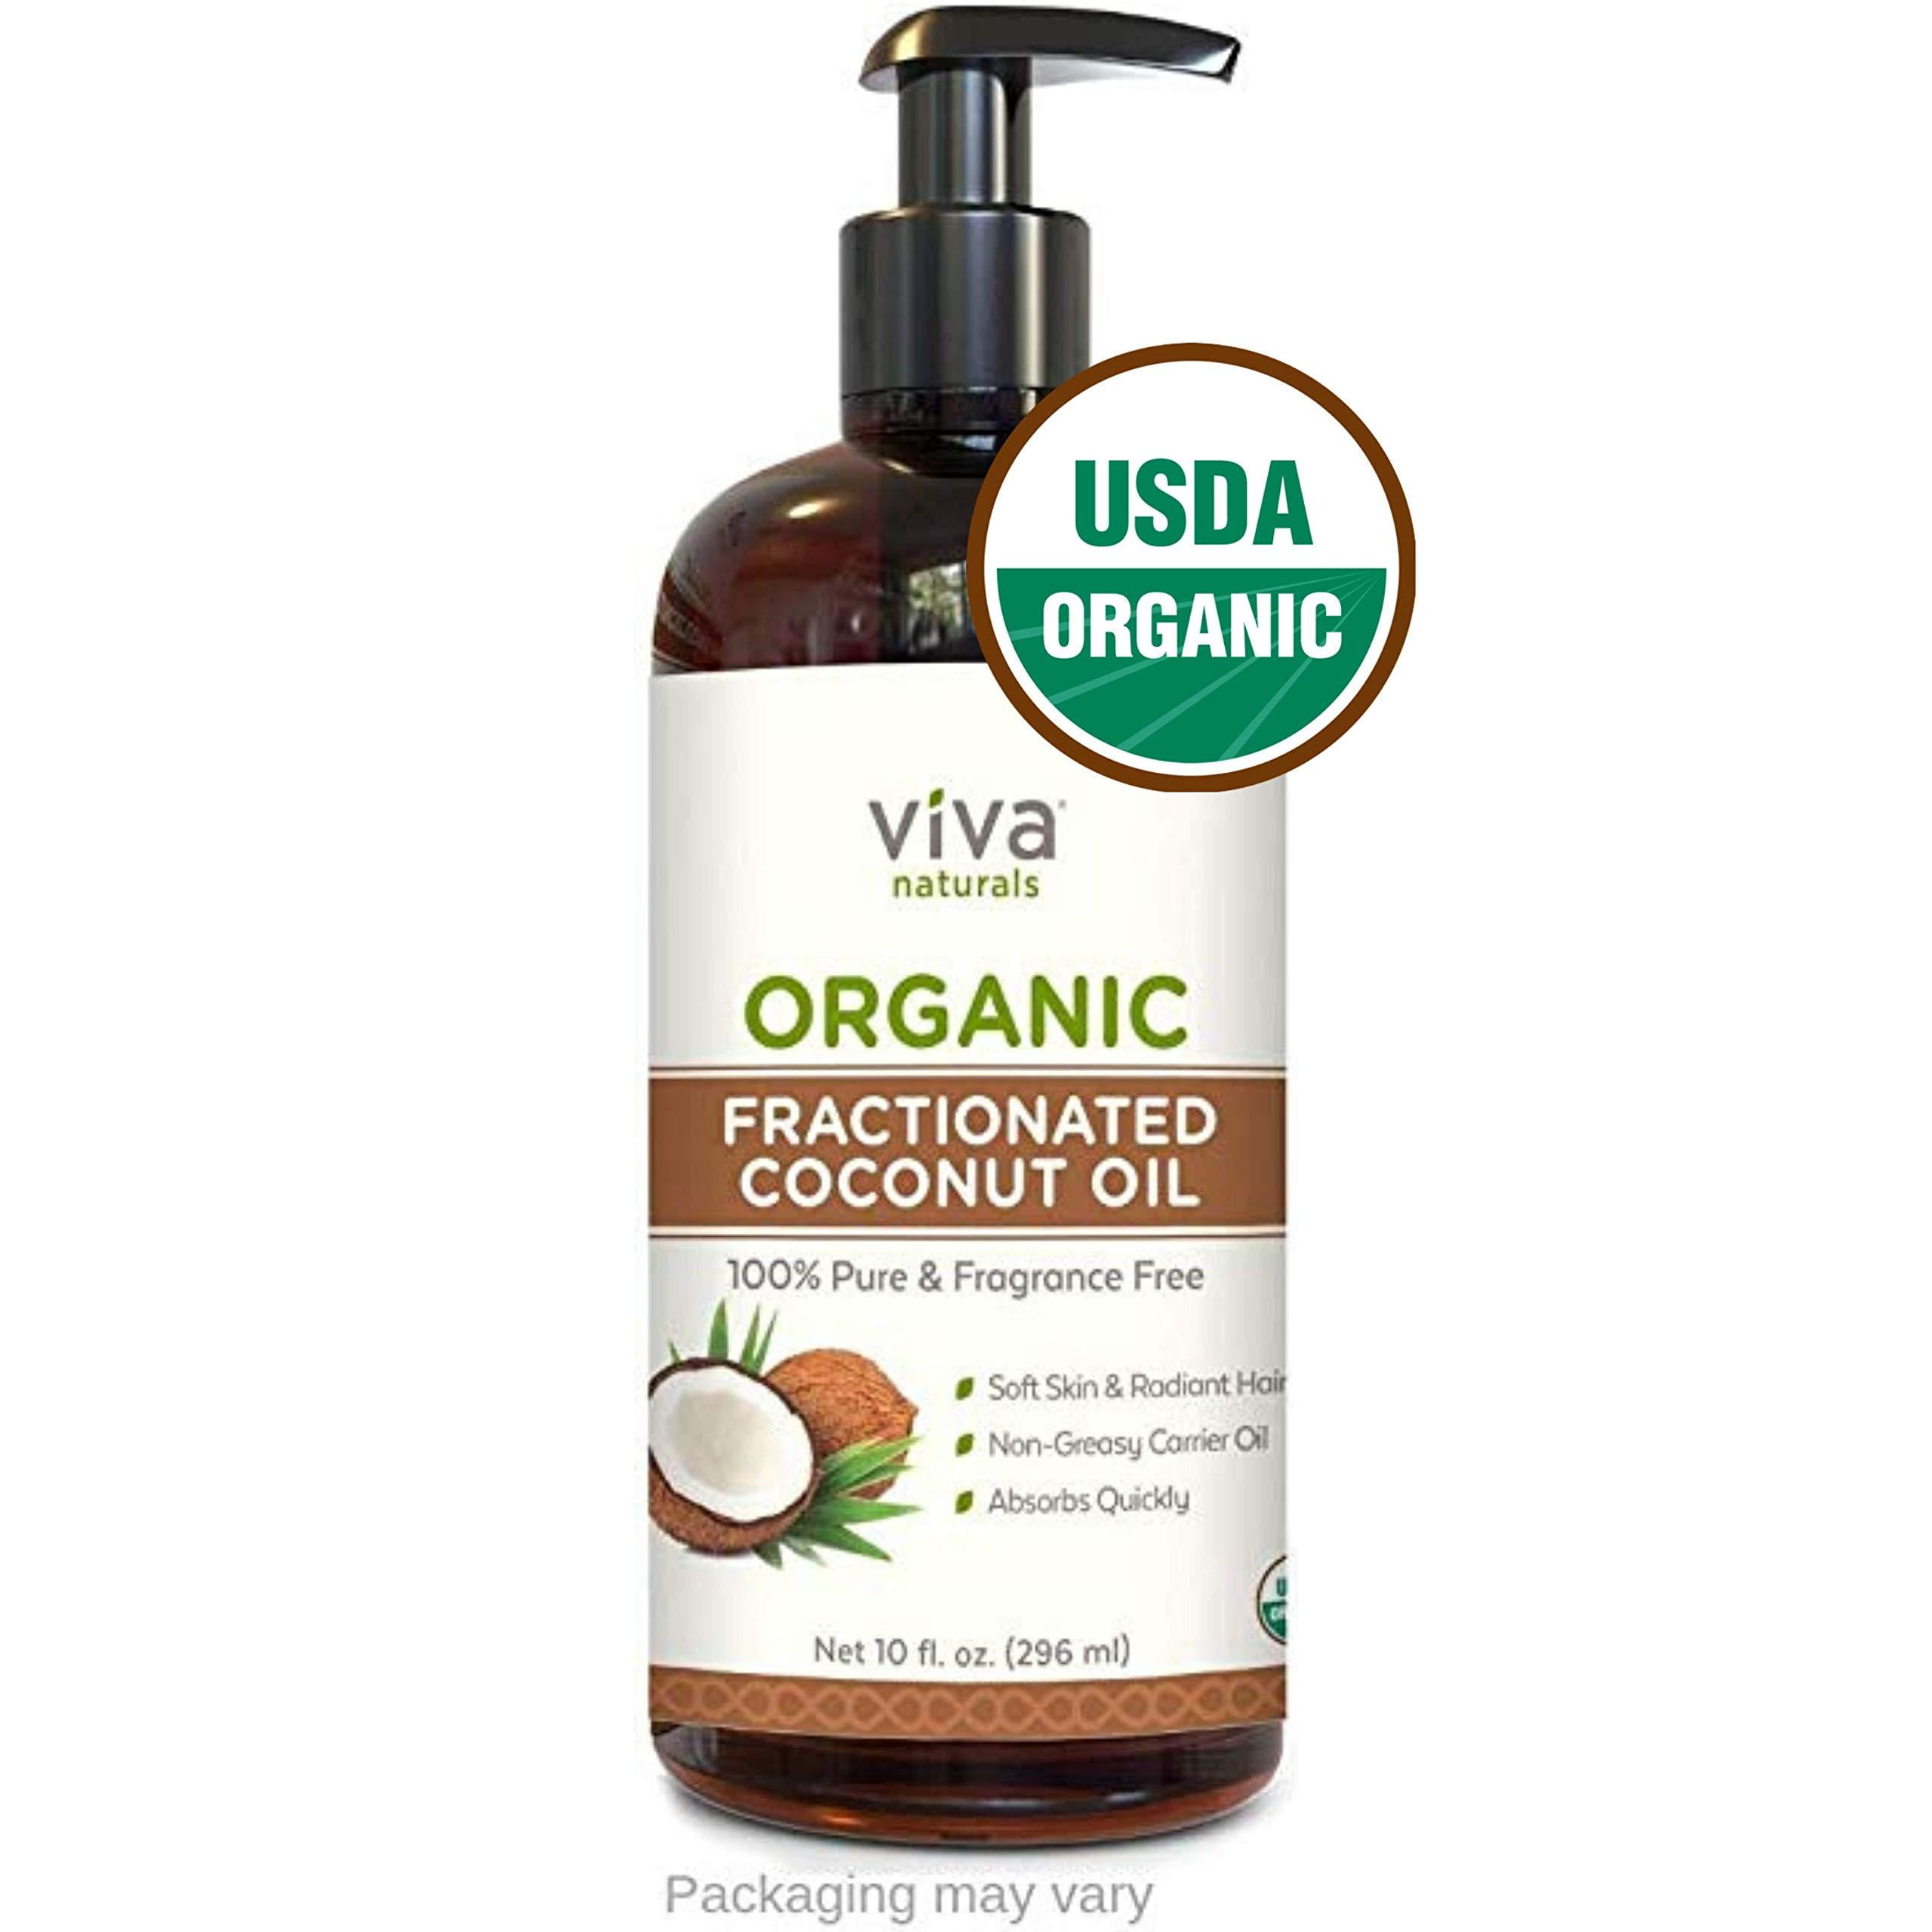 Organic Fractionated Coconut Oil Amazing Massage Oil And Aromatherapy Carrier Oil For Essential